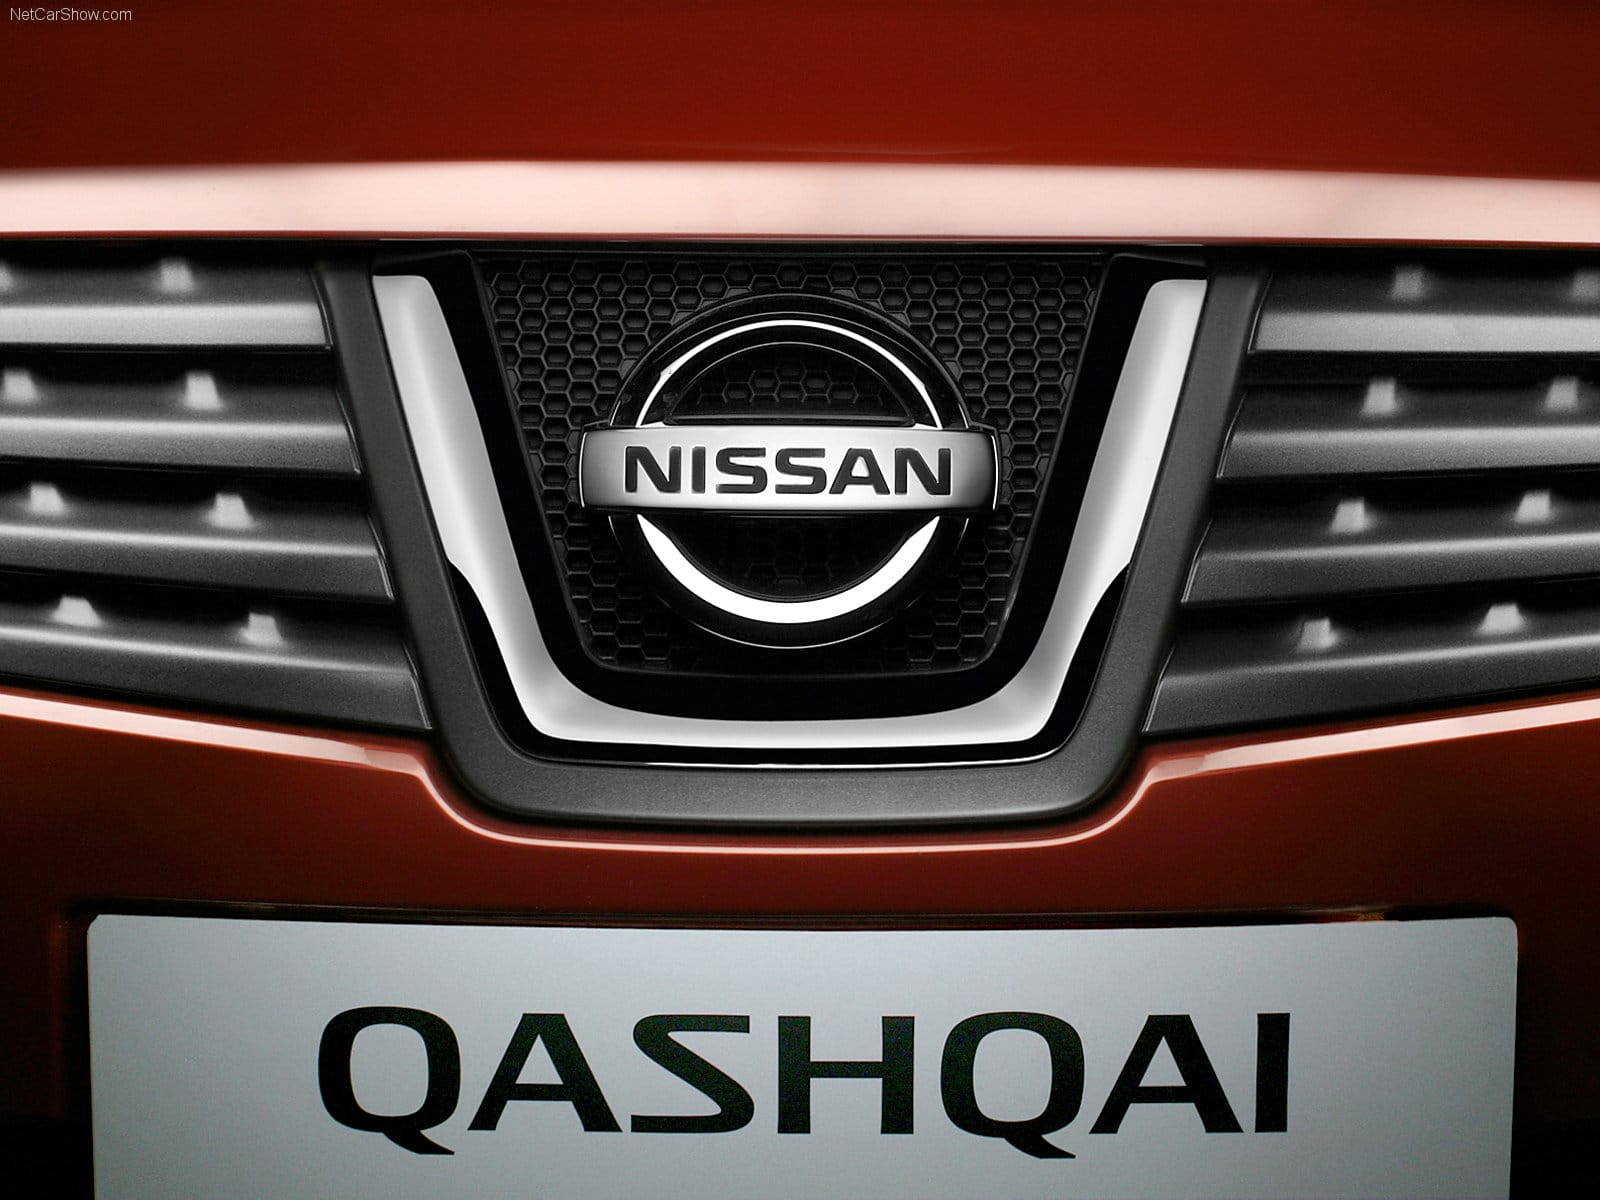 Nissan, Qashqai, Nissan Qashqai, SUV, SUV buying guide, family car, 4x4, Nissan buying guide, used cars, cheap car, cheap family car, motoring, automotive, car, cars, ebay, ebay motors, Adrian Flux, Autotrader, not 2 grand, www.not2grand.co.uk, featured